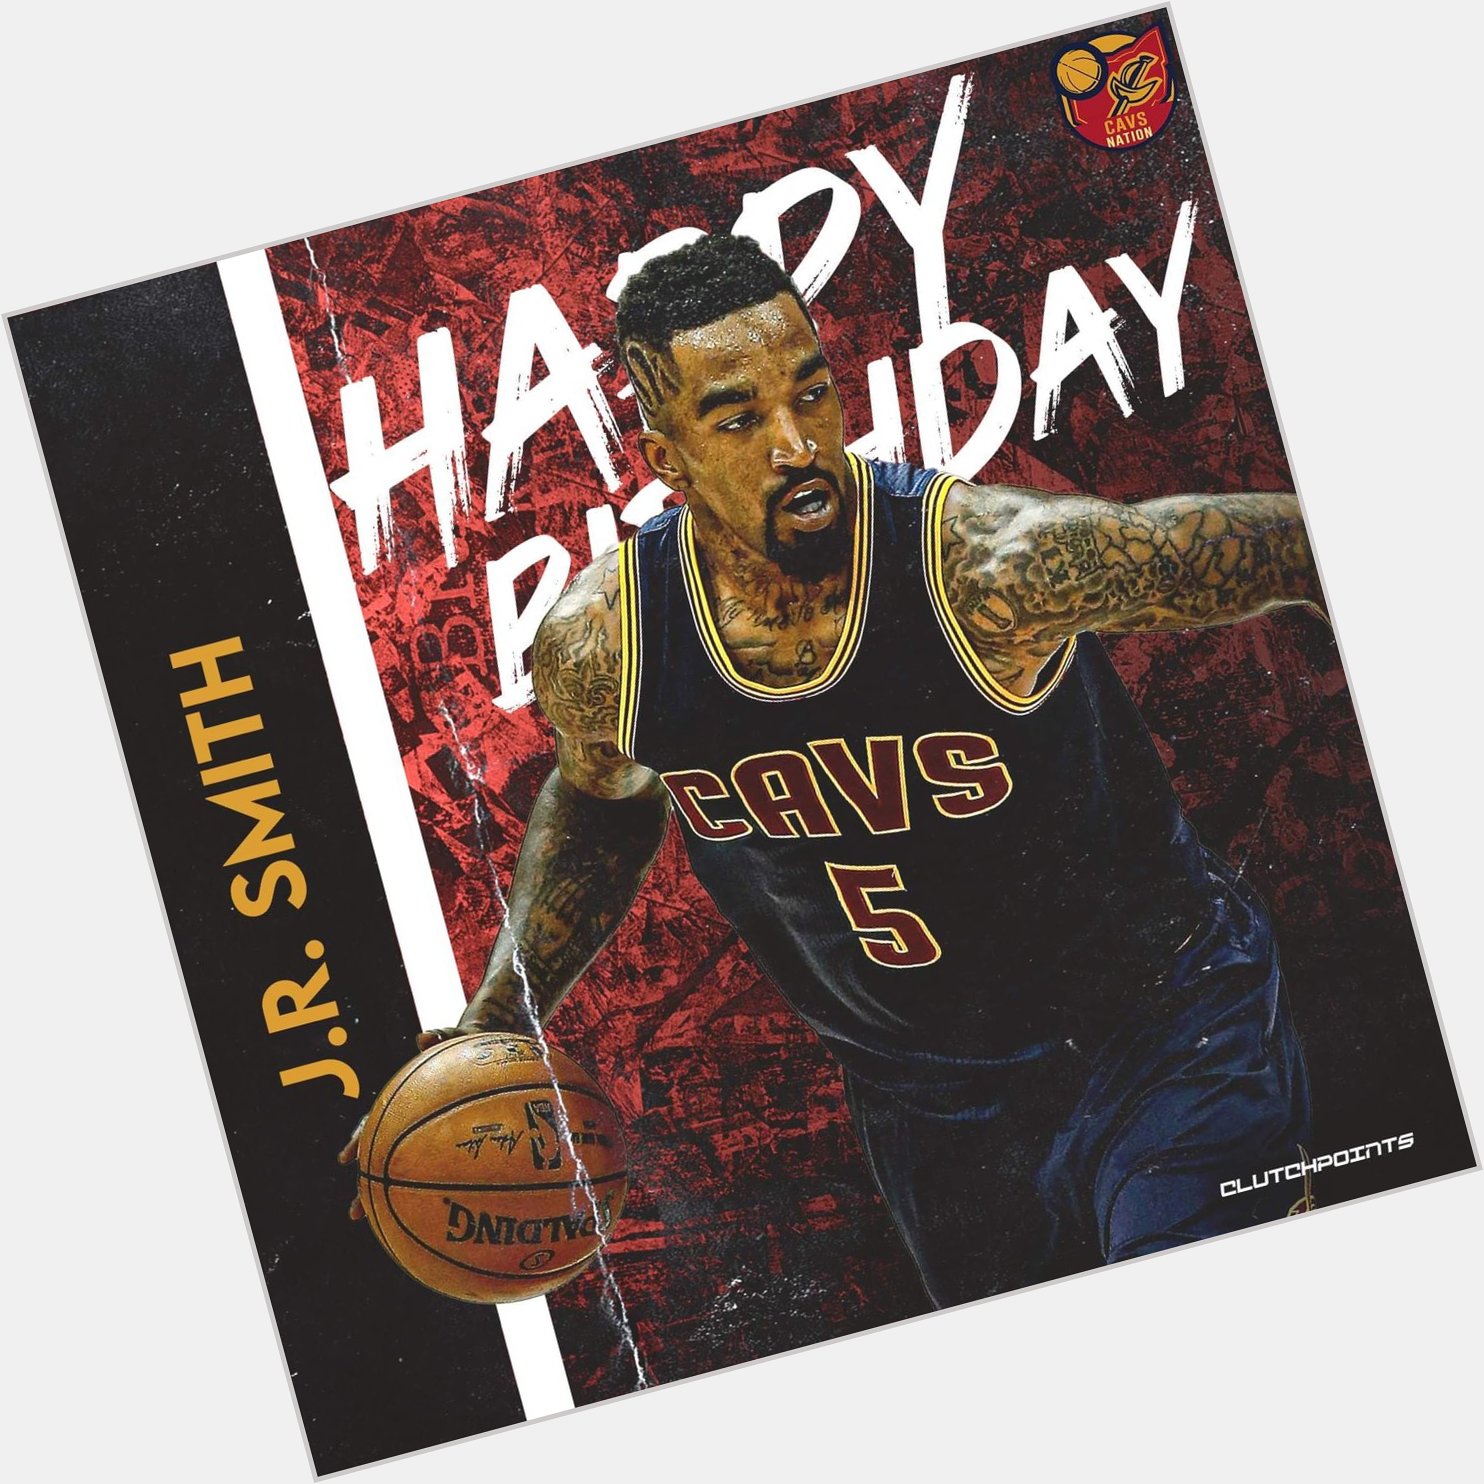 Join Cavs Nation in greeting 2013 Sixth Man of the Year and 2x NBA Champ, J.R. Smith, with a happy 36th birthday!  